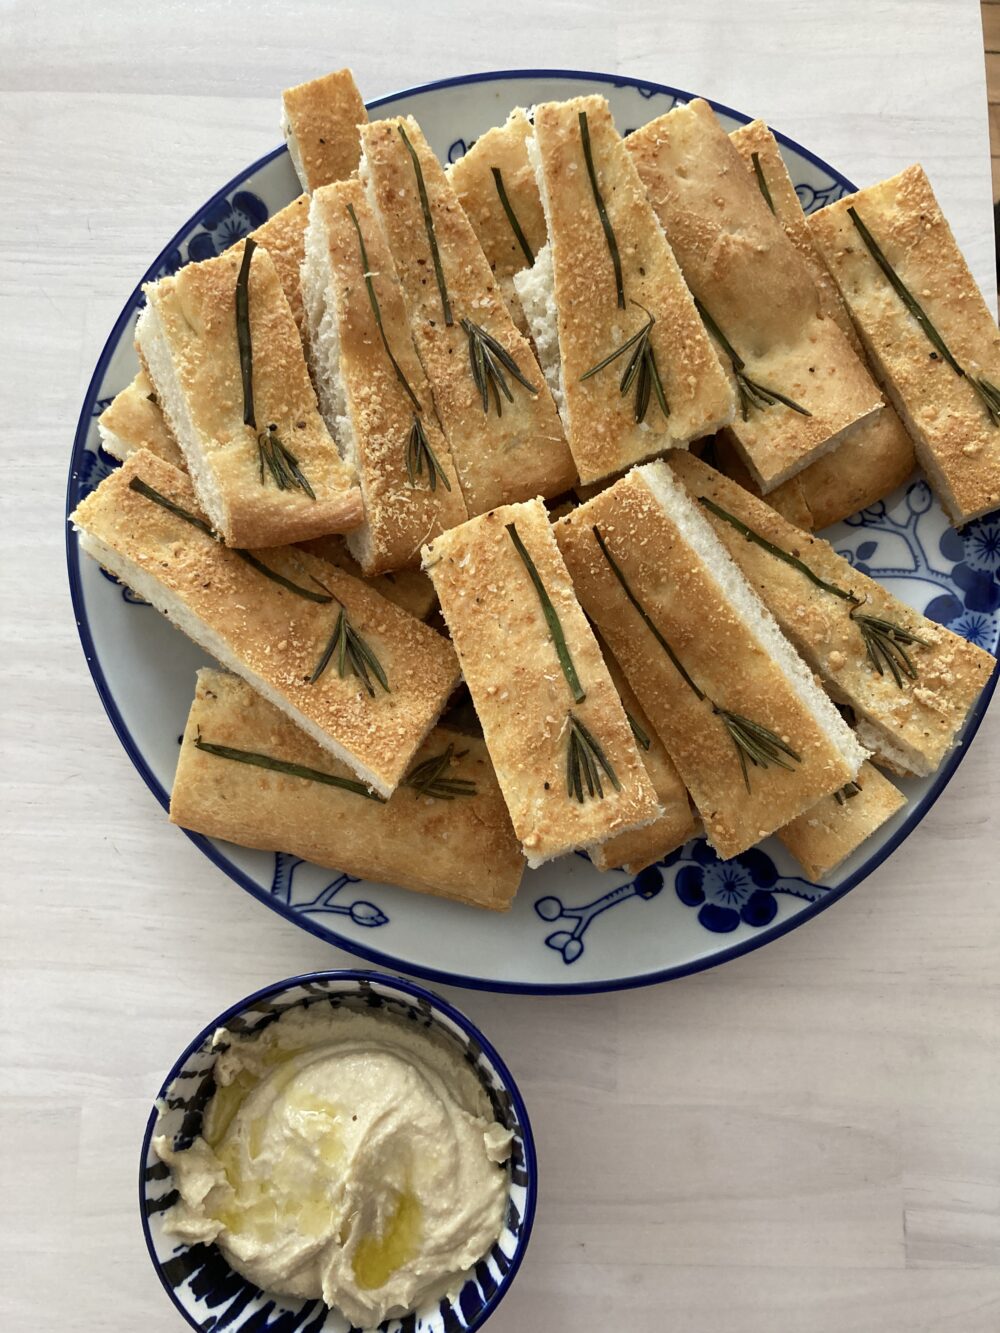 A plate of thin, long pieces of focaccia with a broom design comprised of rosemary and chives is shown on a white and blue plate with a bowl of hummus nearby.